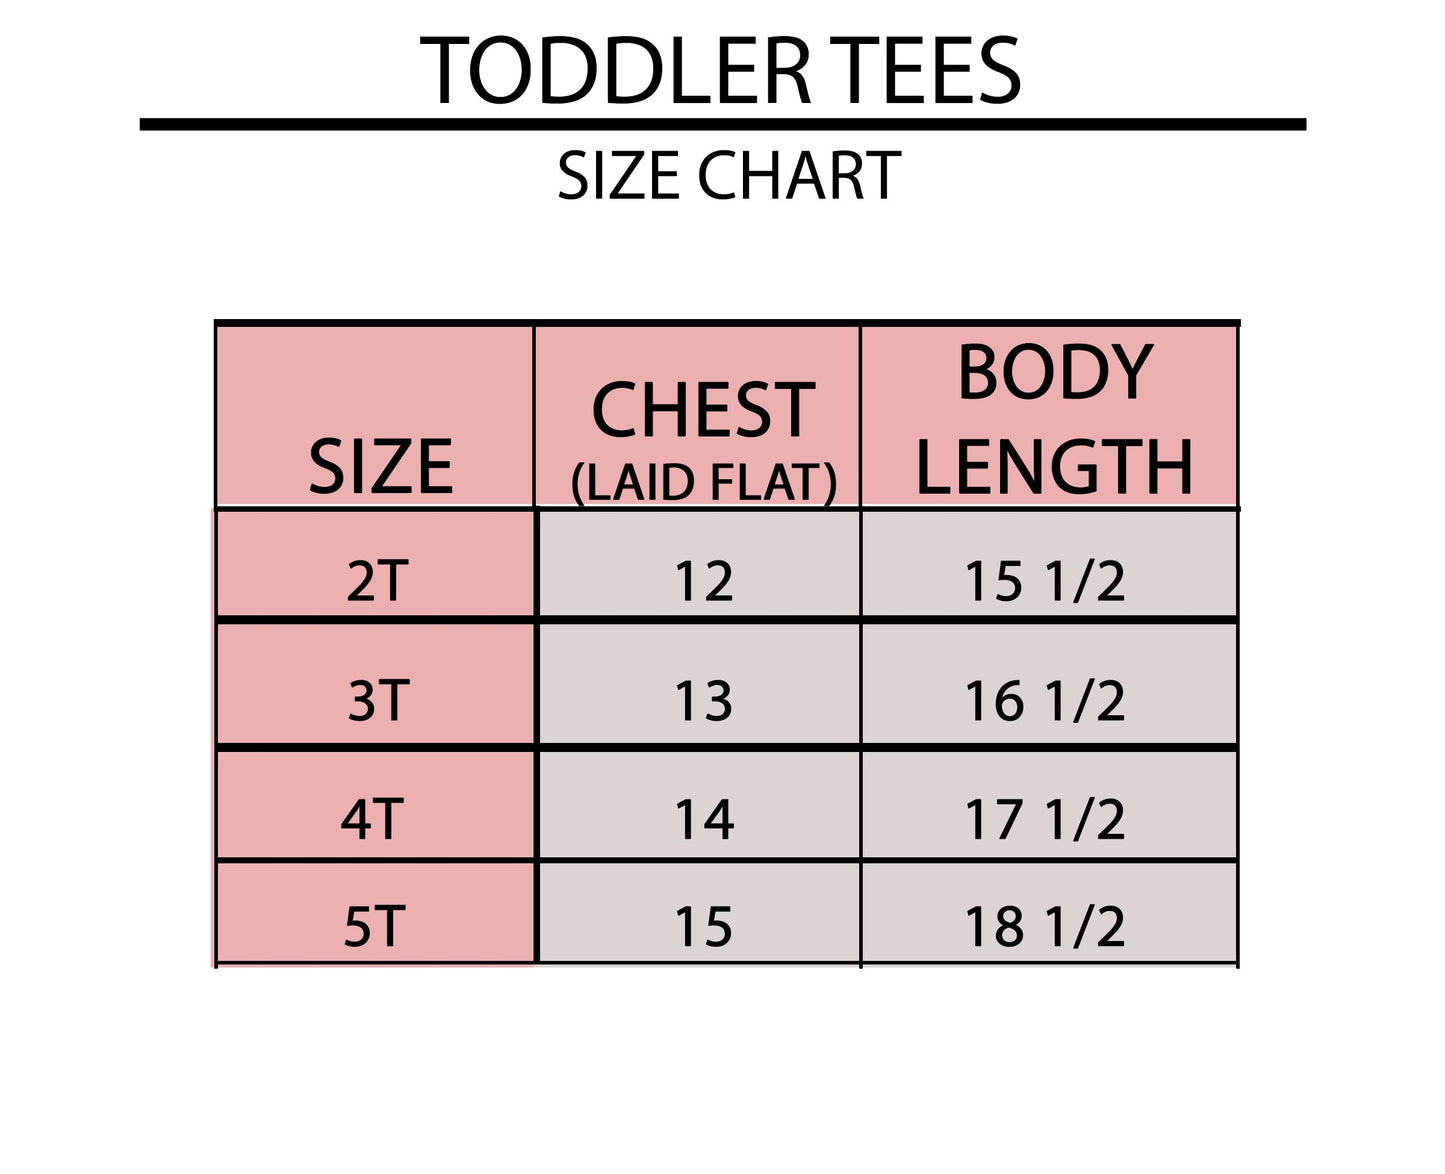 Rudolph Bold | Toddler Graphic Short Sleeve Tee